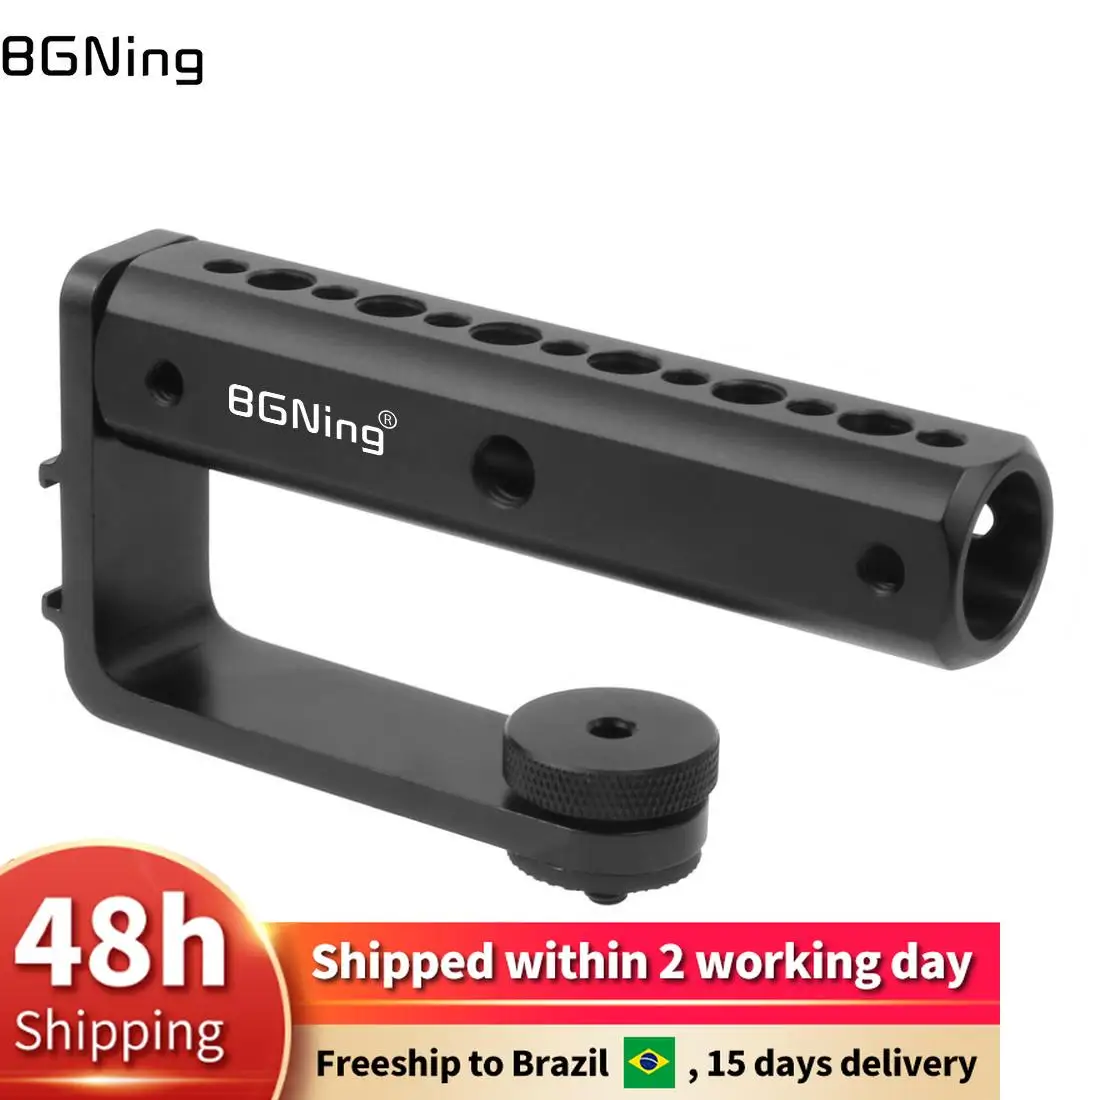 BGNing Aluminum Alloy Top Handle Grip with 1/4 3/8 Thread Cold Shoe Mount for DJI Ronin S for Zhiyun Crane 2 Gimbal Stabilizer